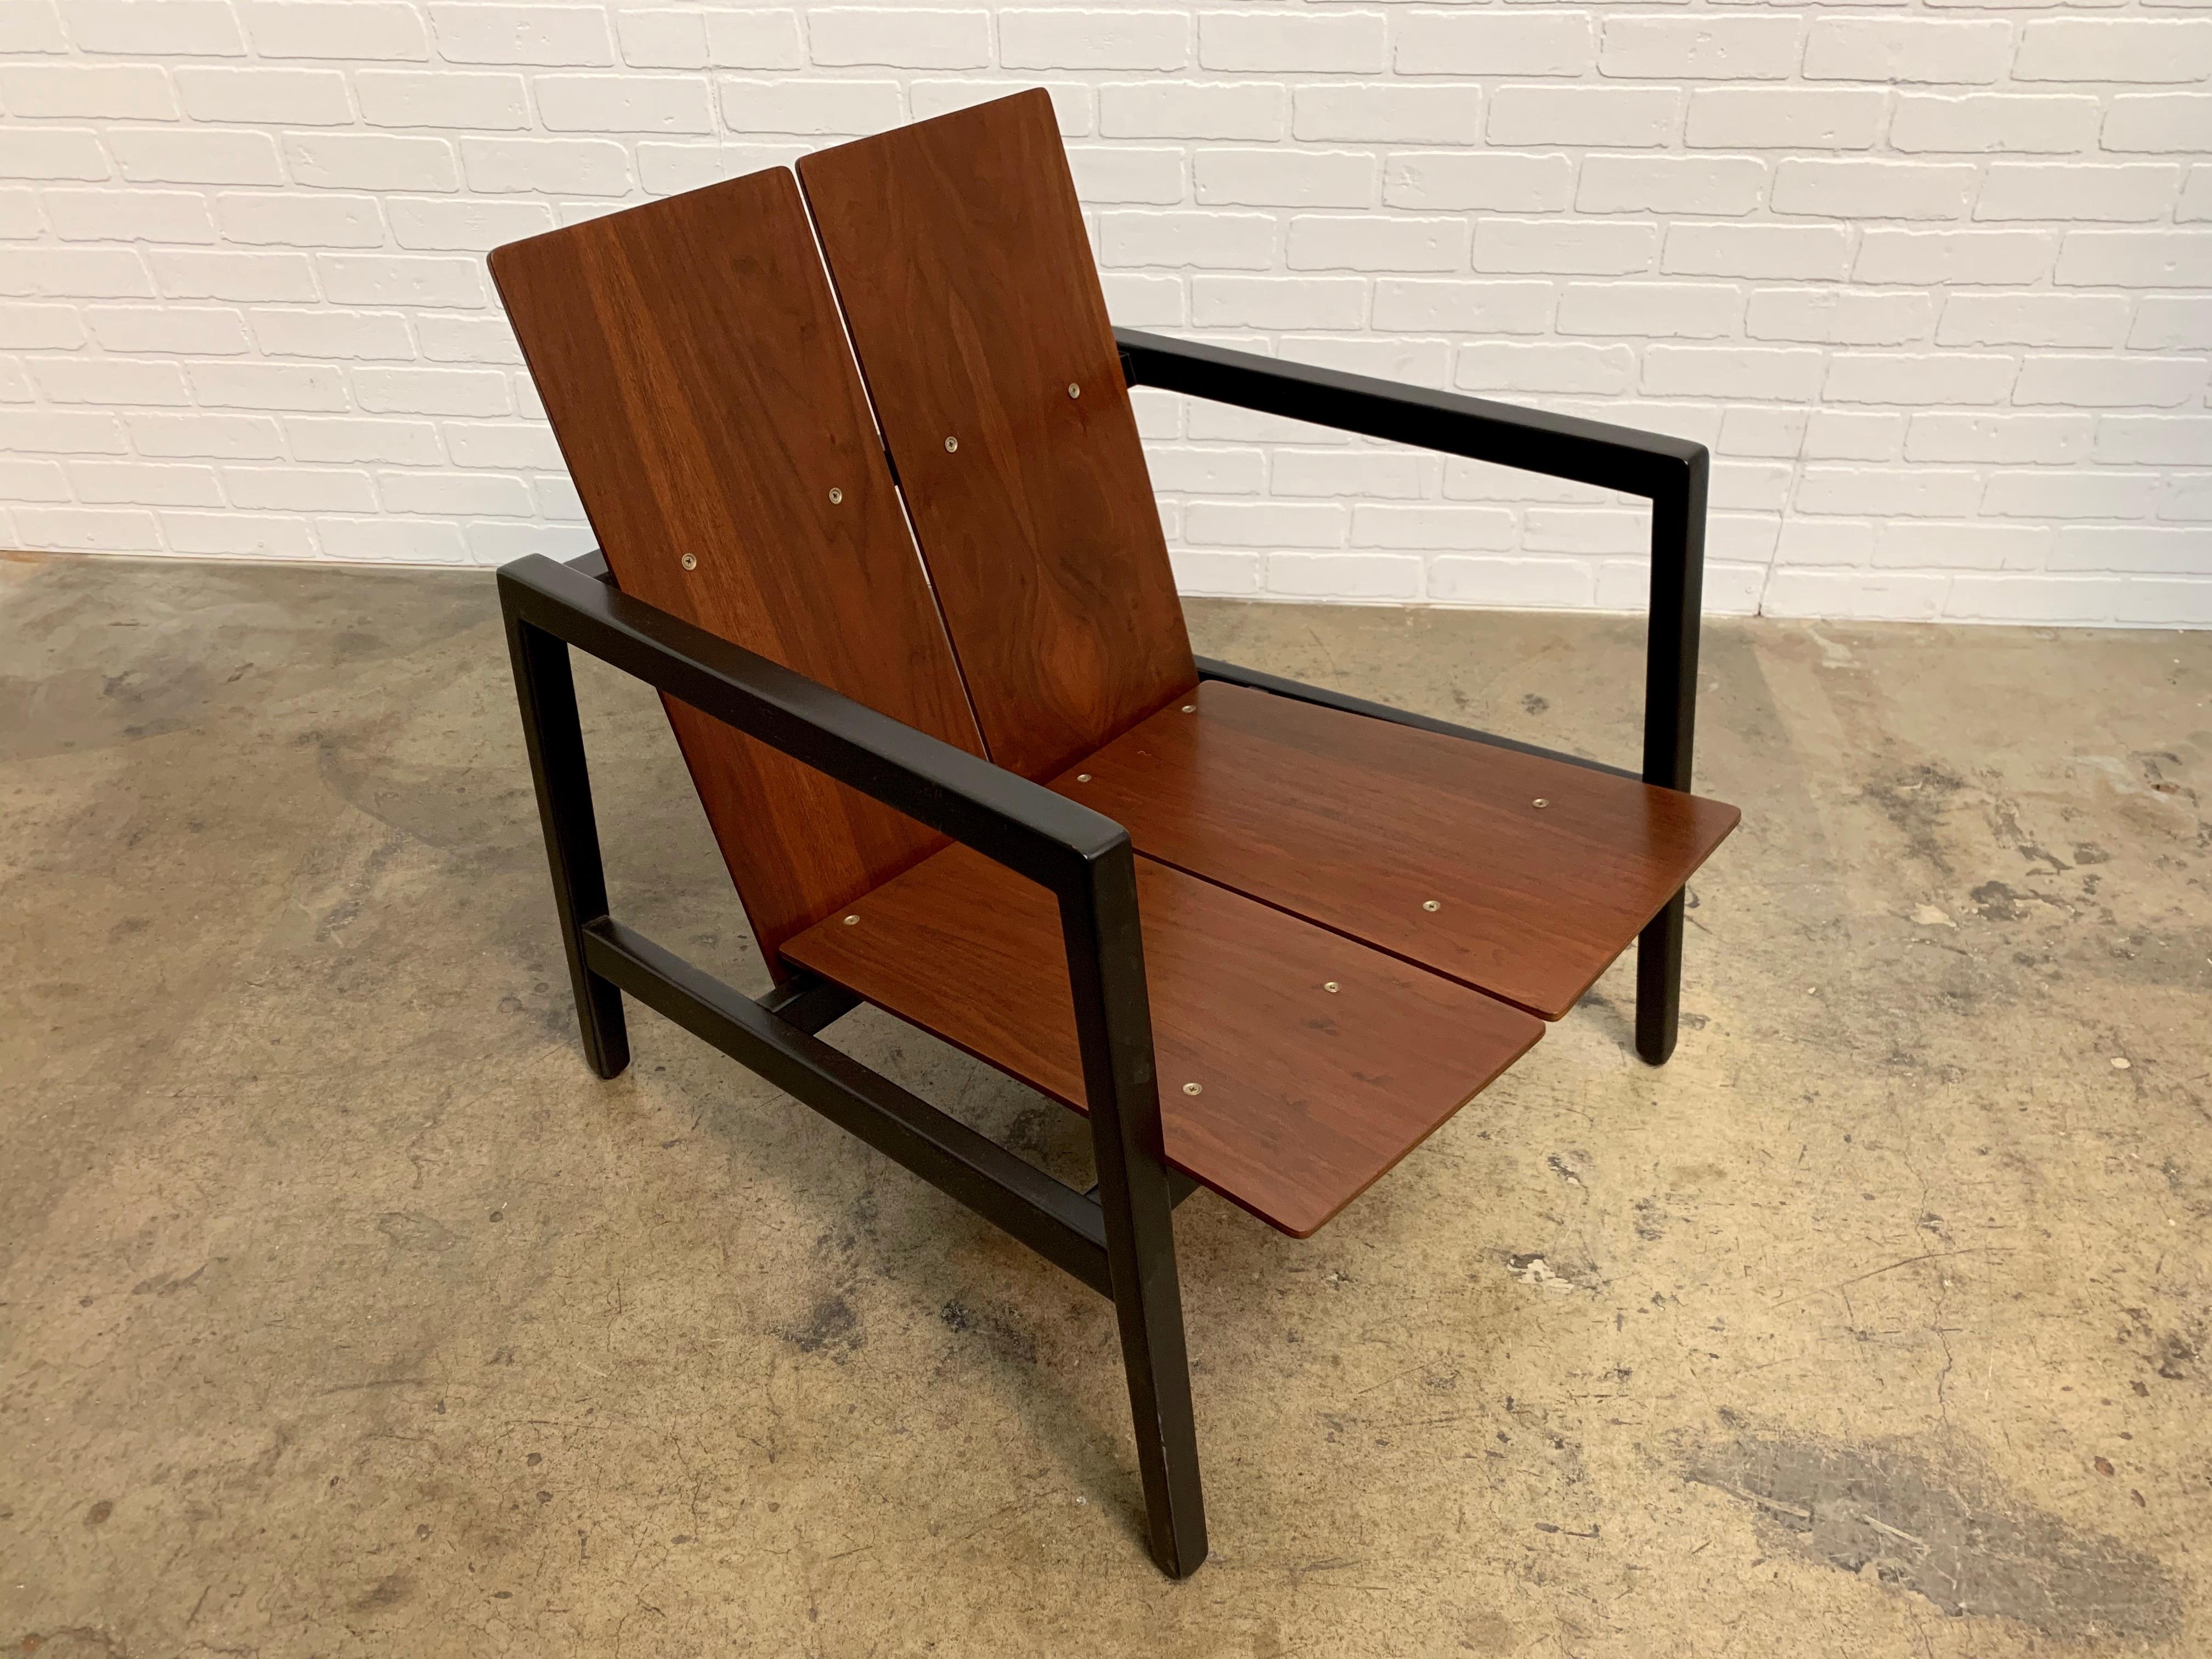 Lewis Butler model 645 lounge chair for Knoll.